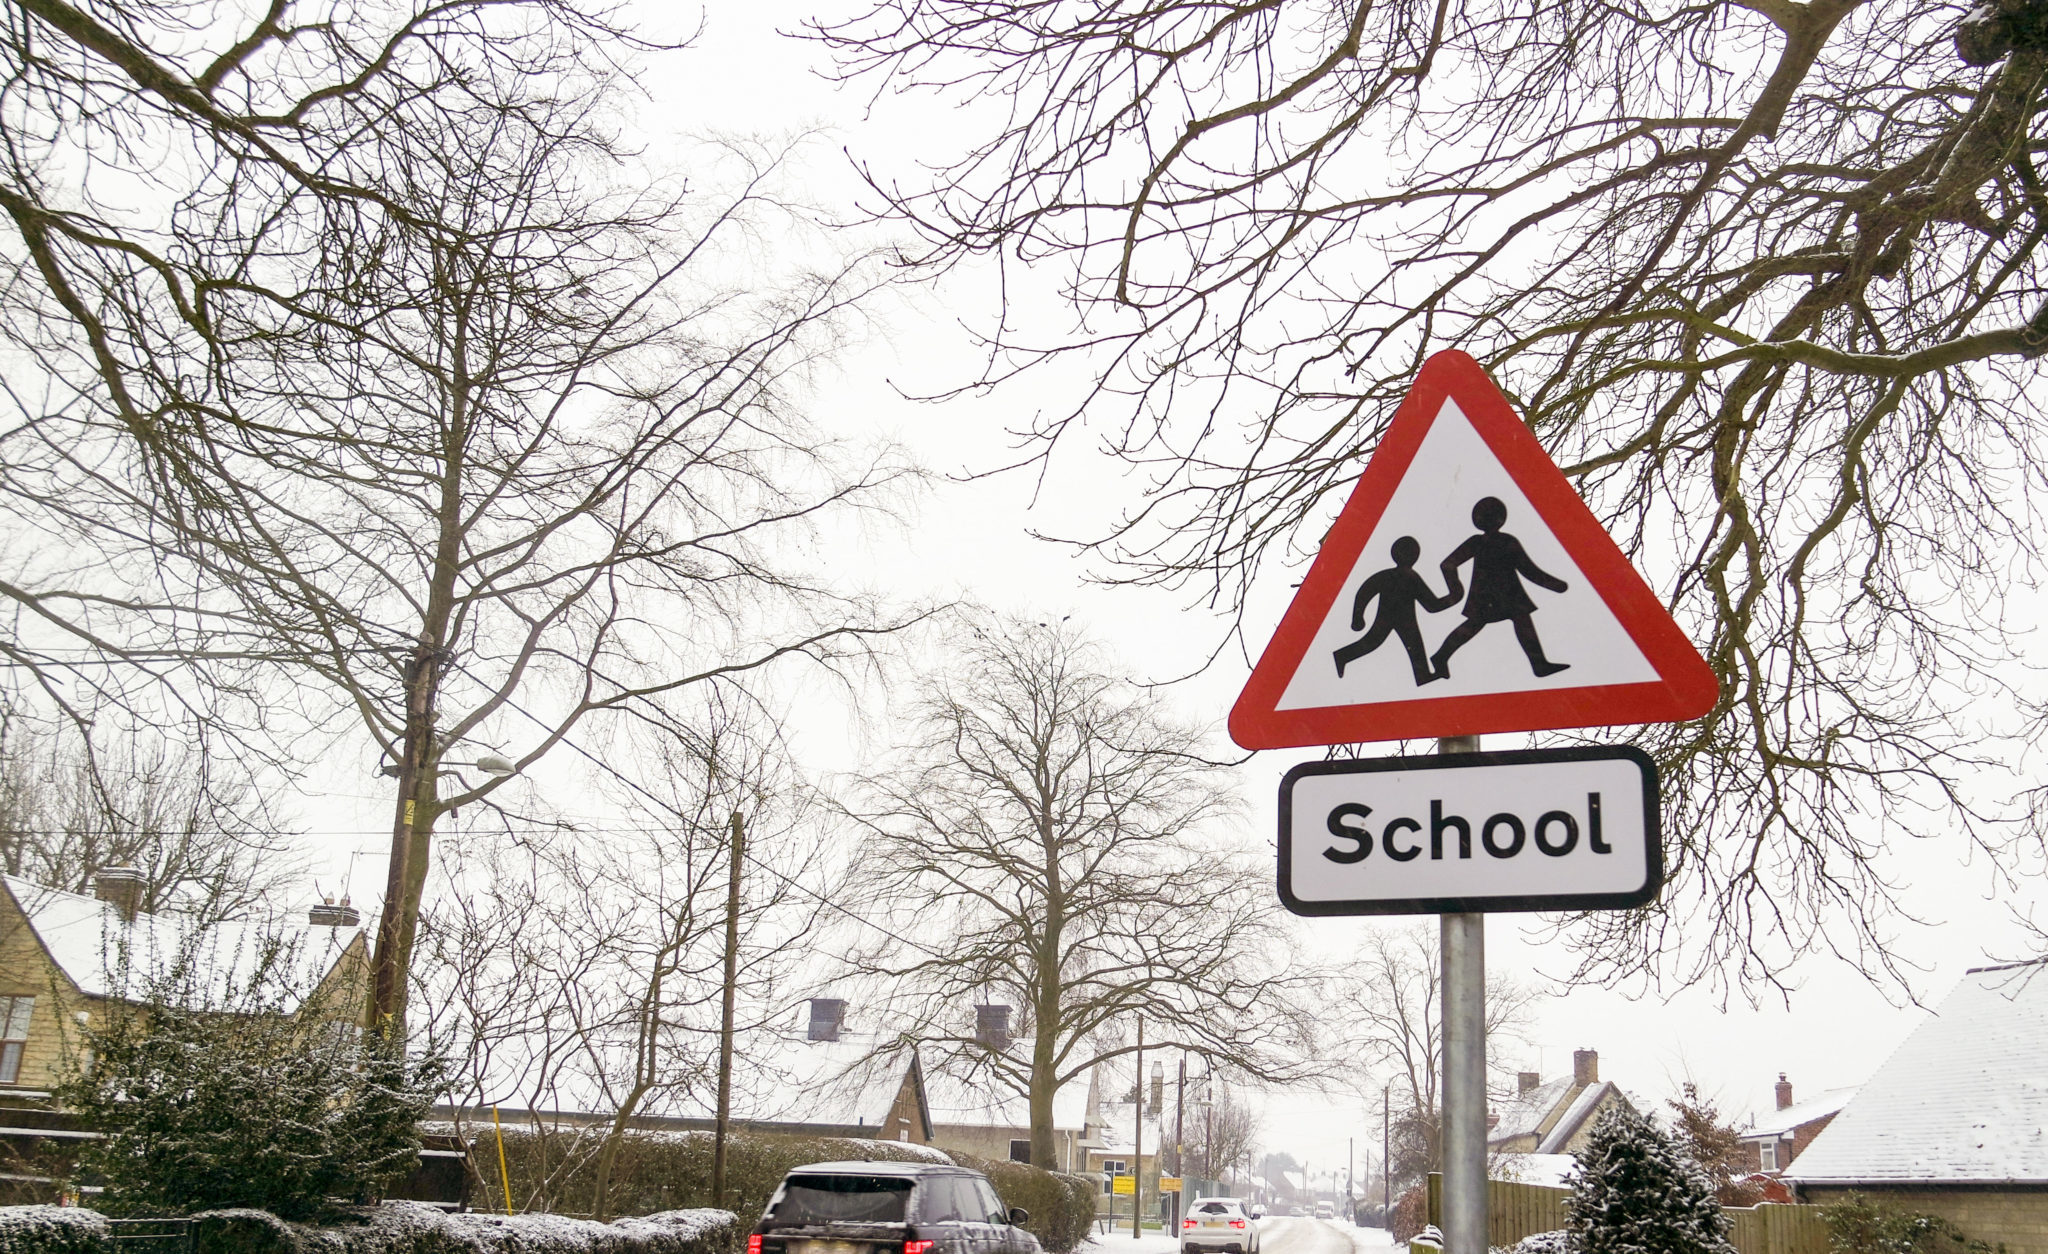 File photo shows a school sign